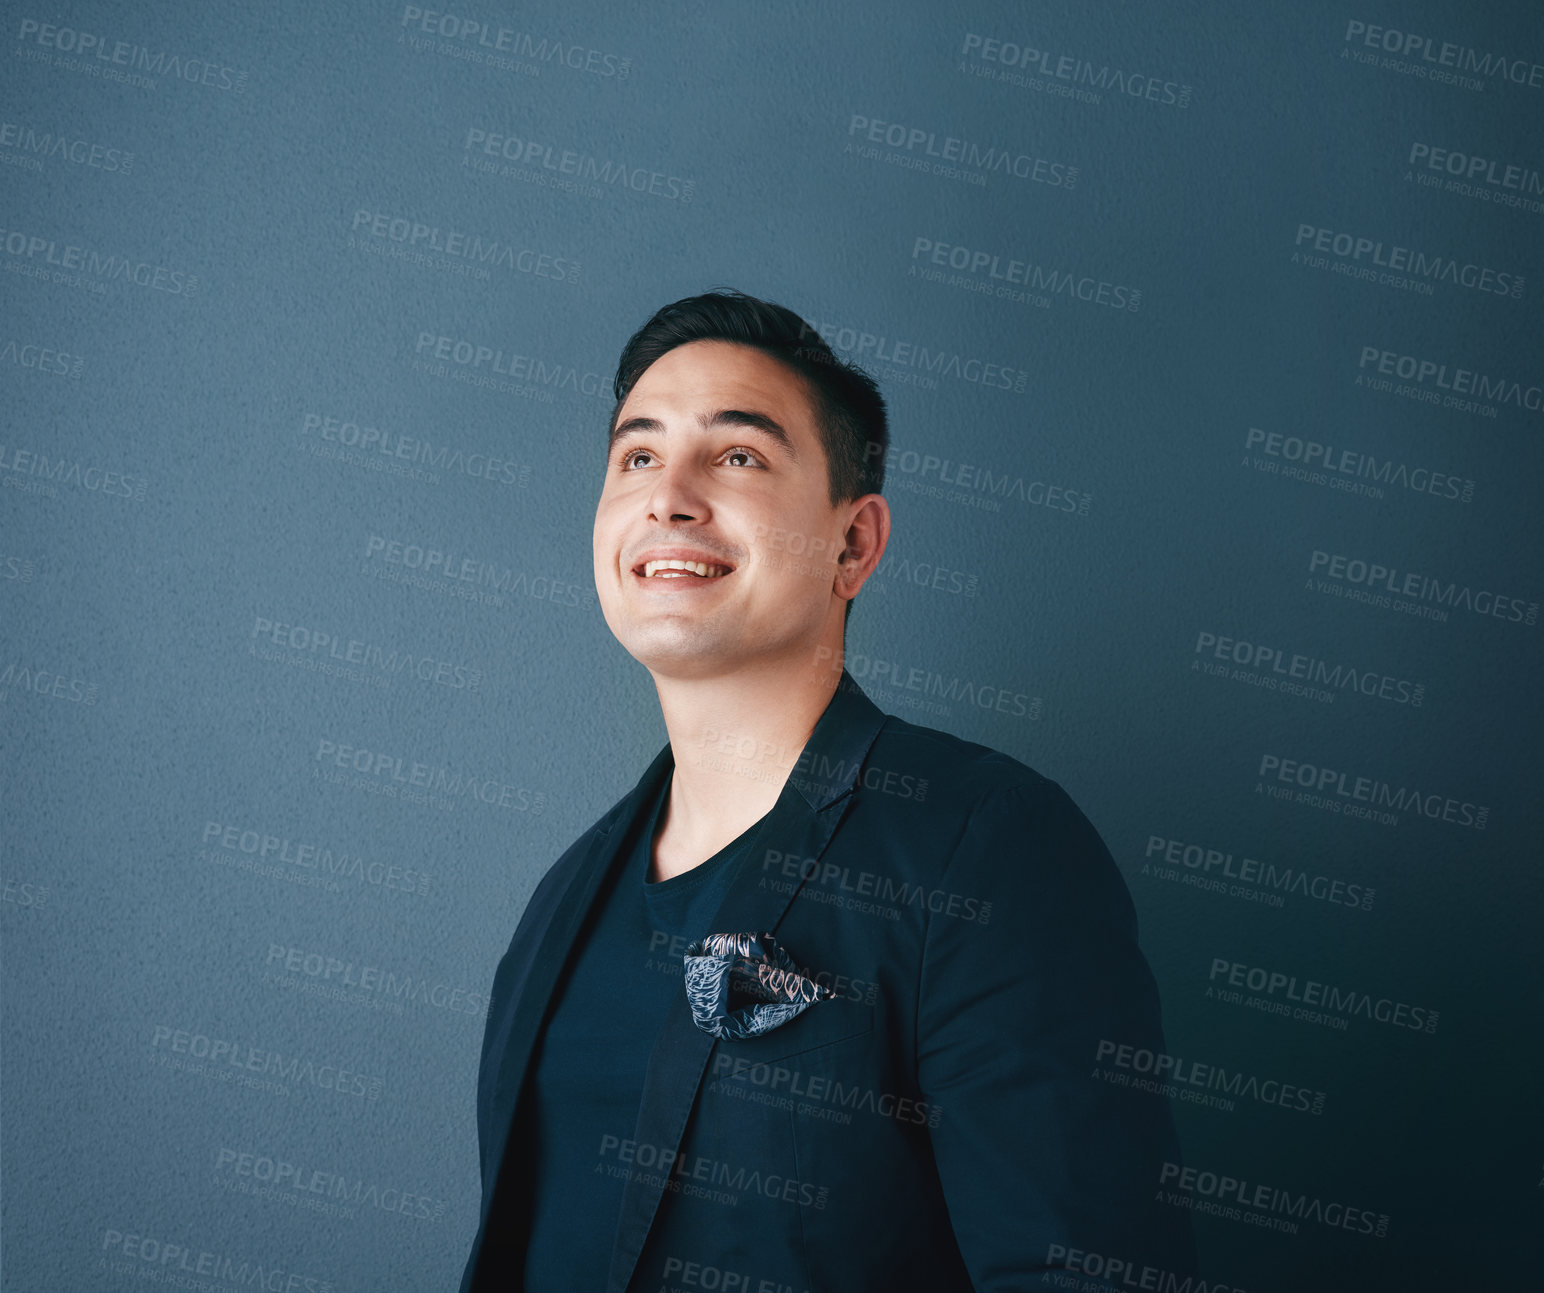 Buy stock photo Studio shot of a handsome young man posing against a blue background